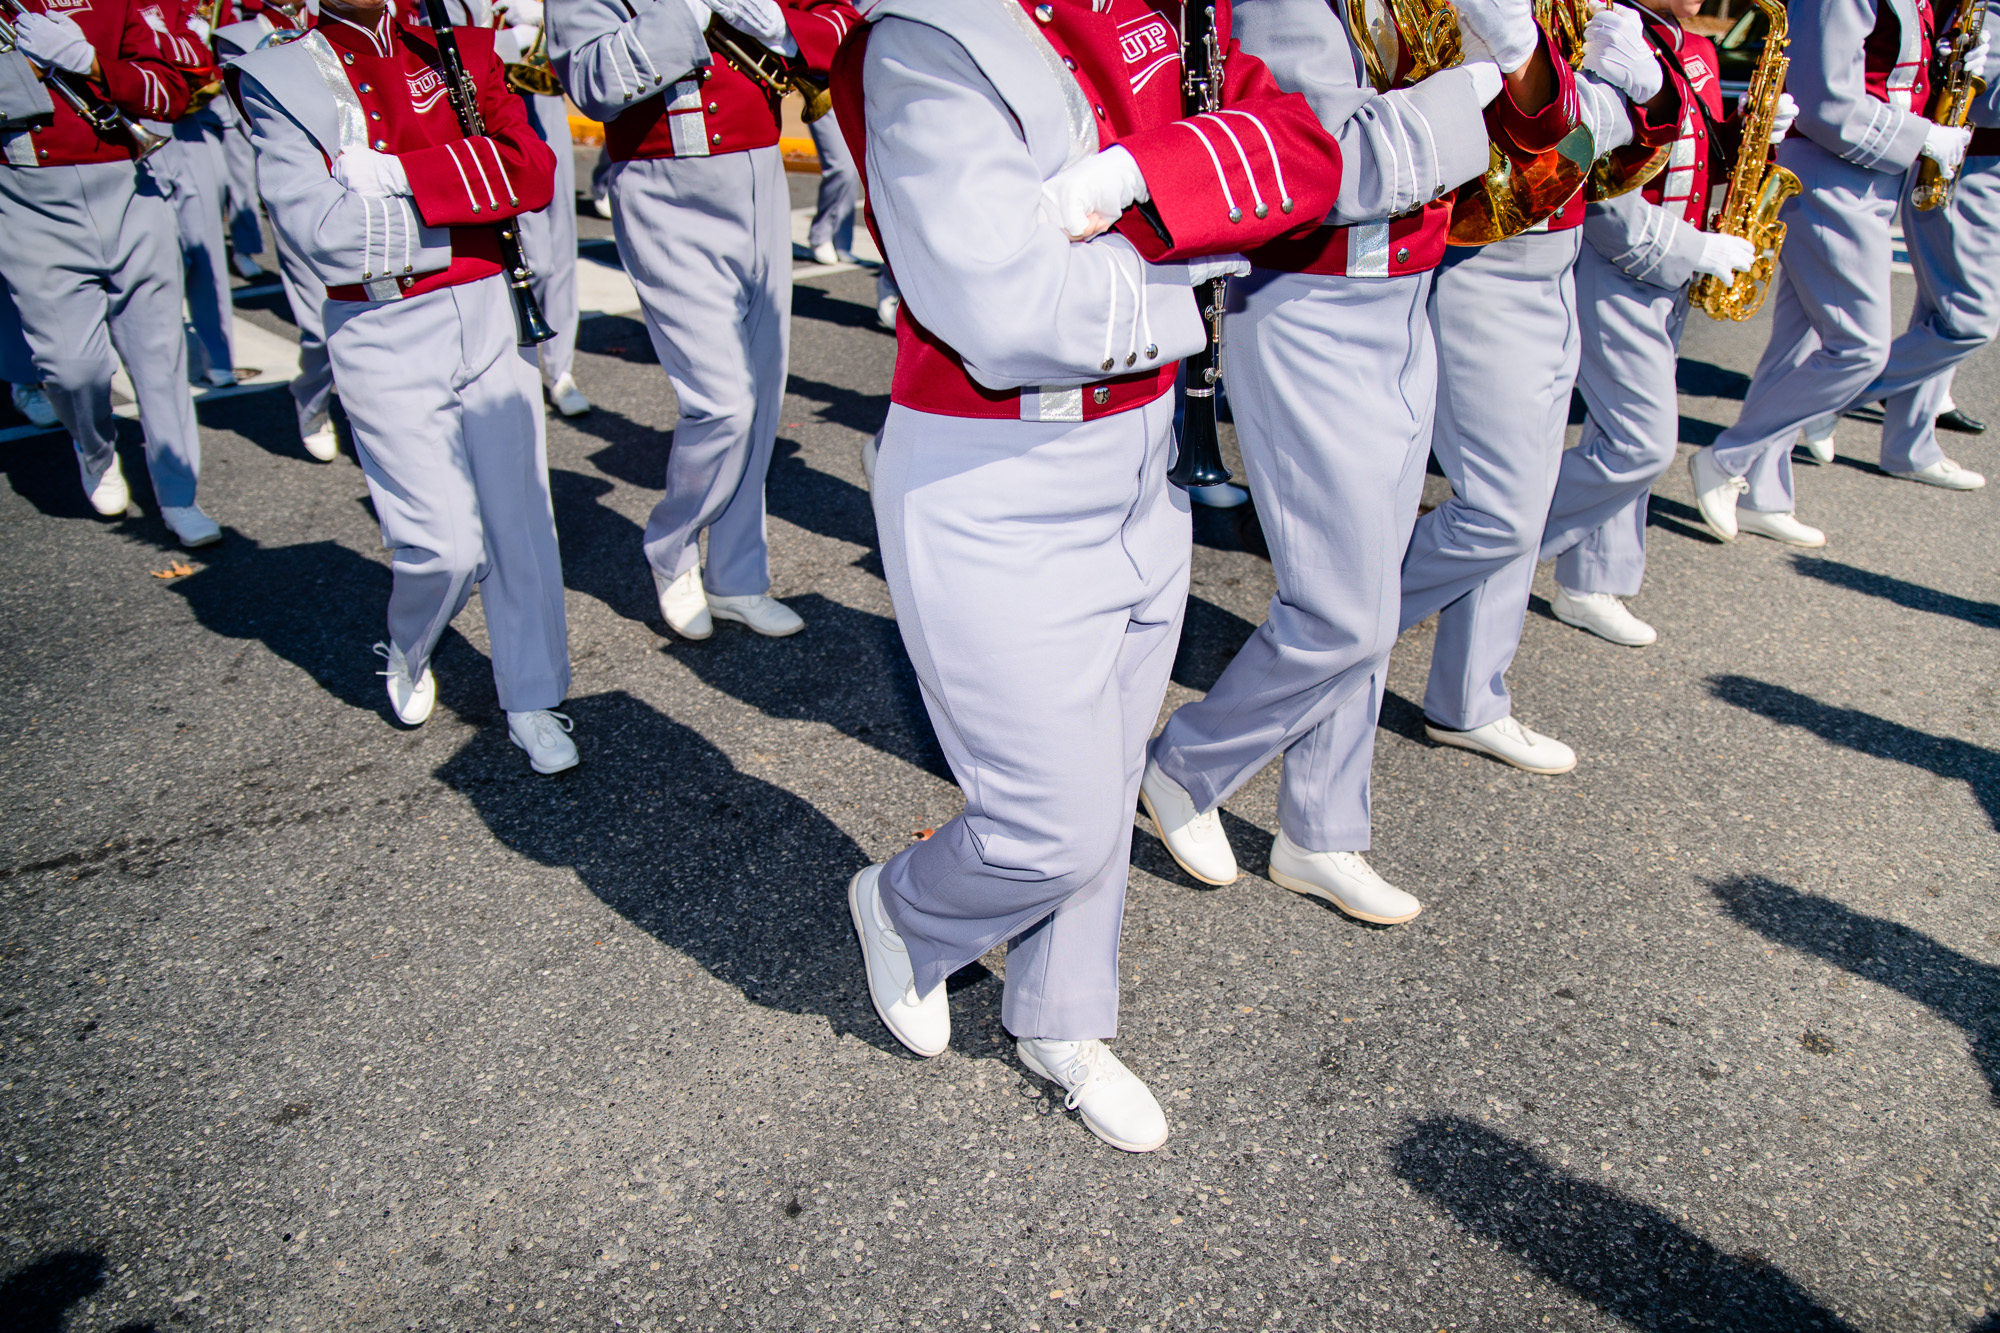 The band marches down the street through IUP's campus.